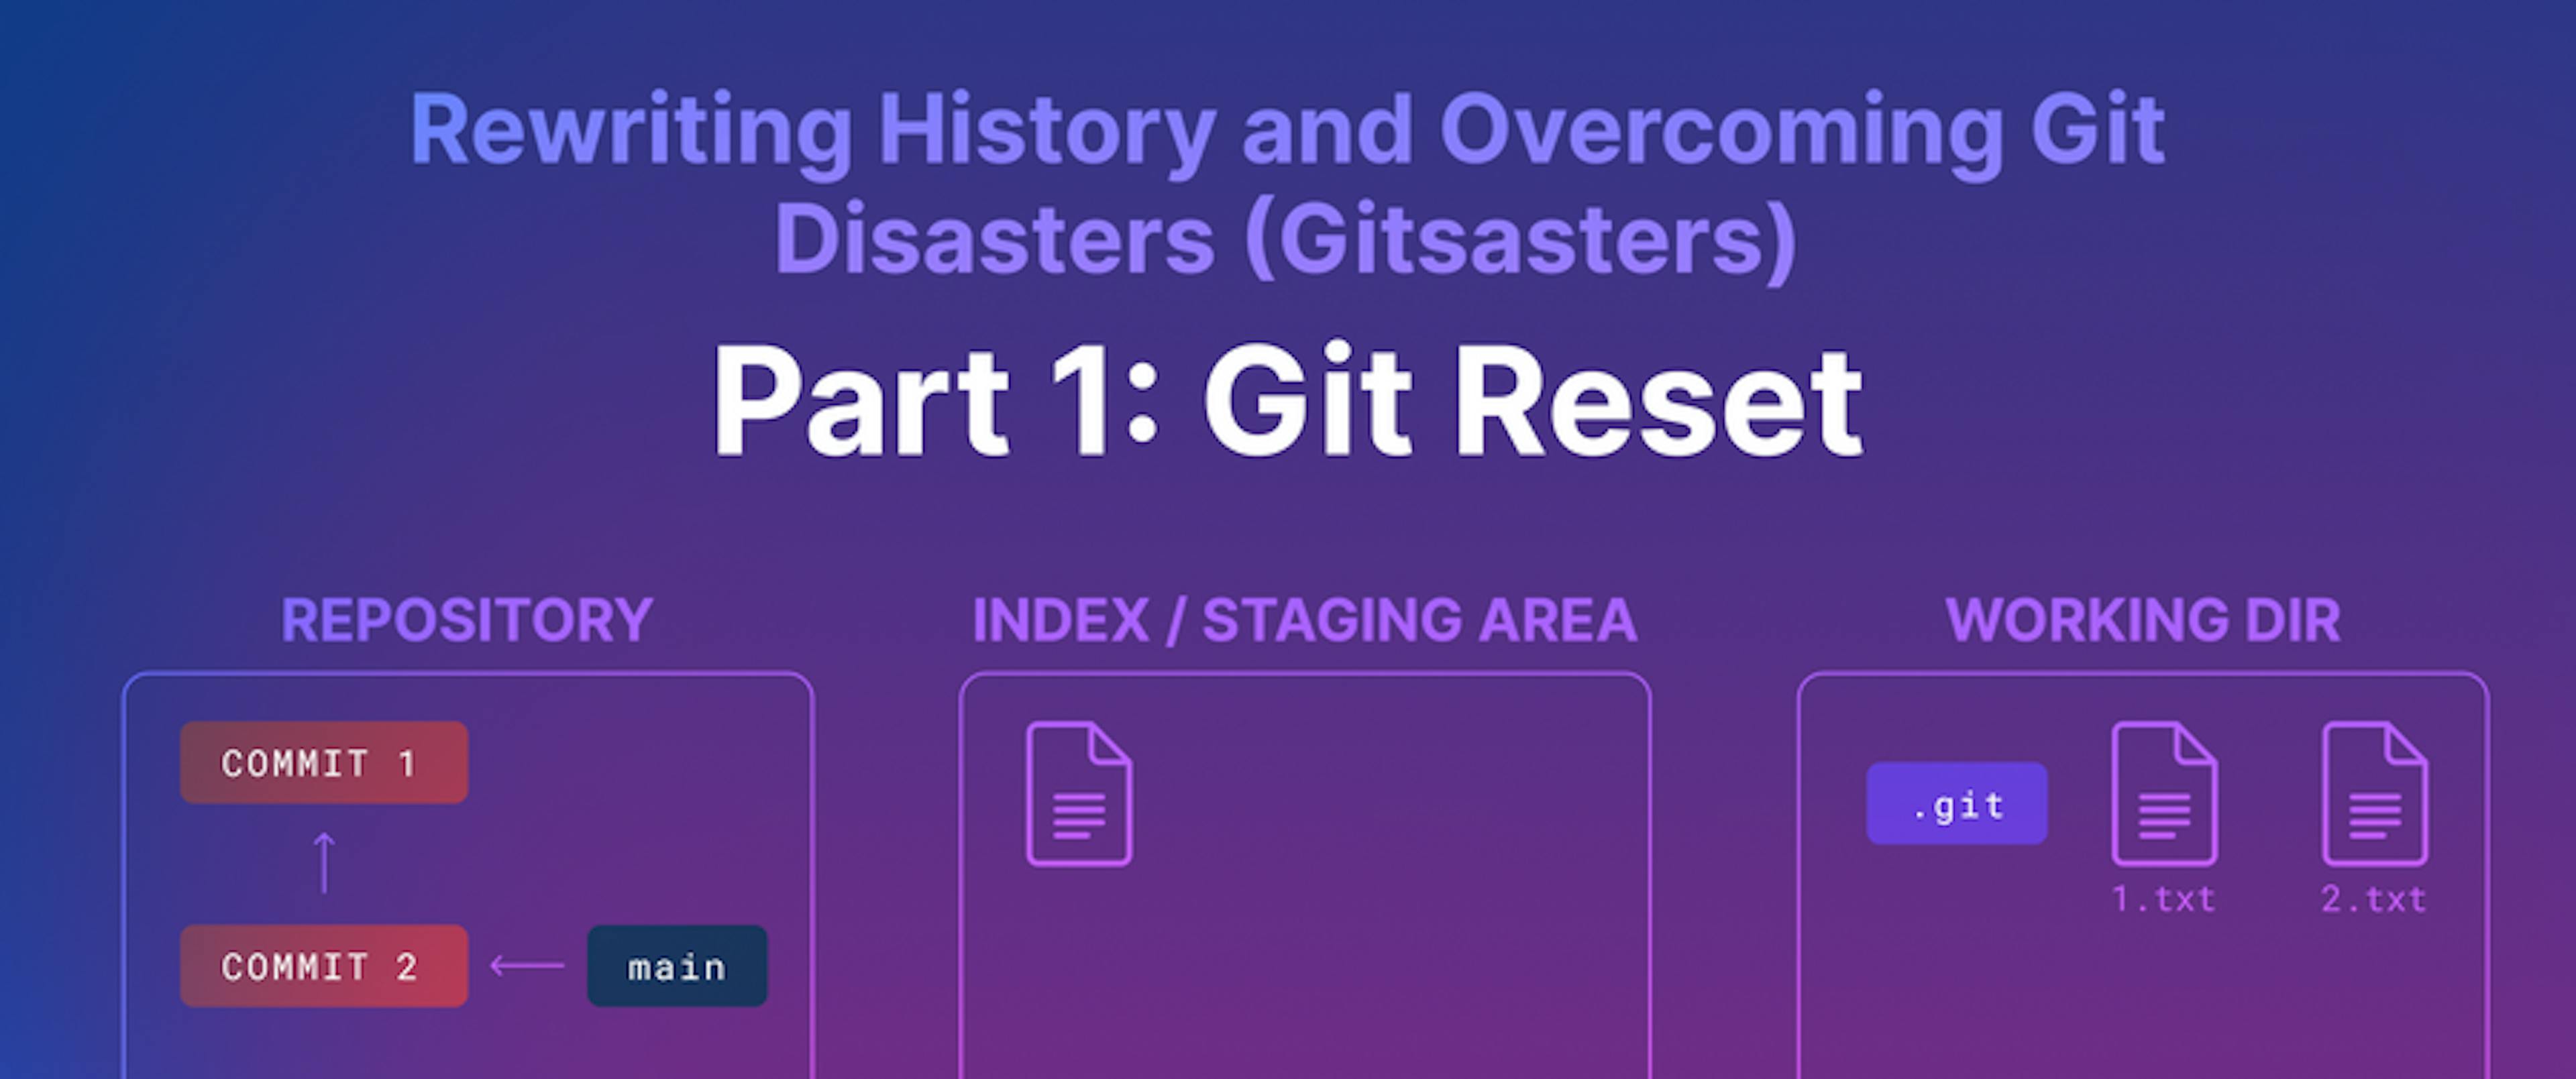 /how-to-avoid-git-disasters-gitstasters-part-1-git-reset feature image